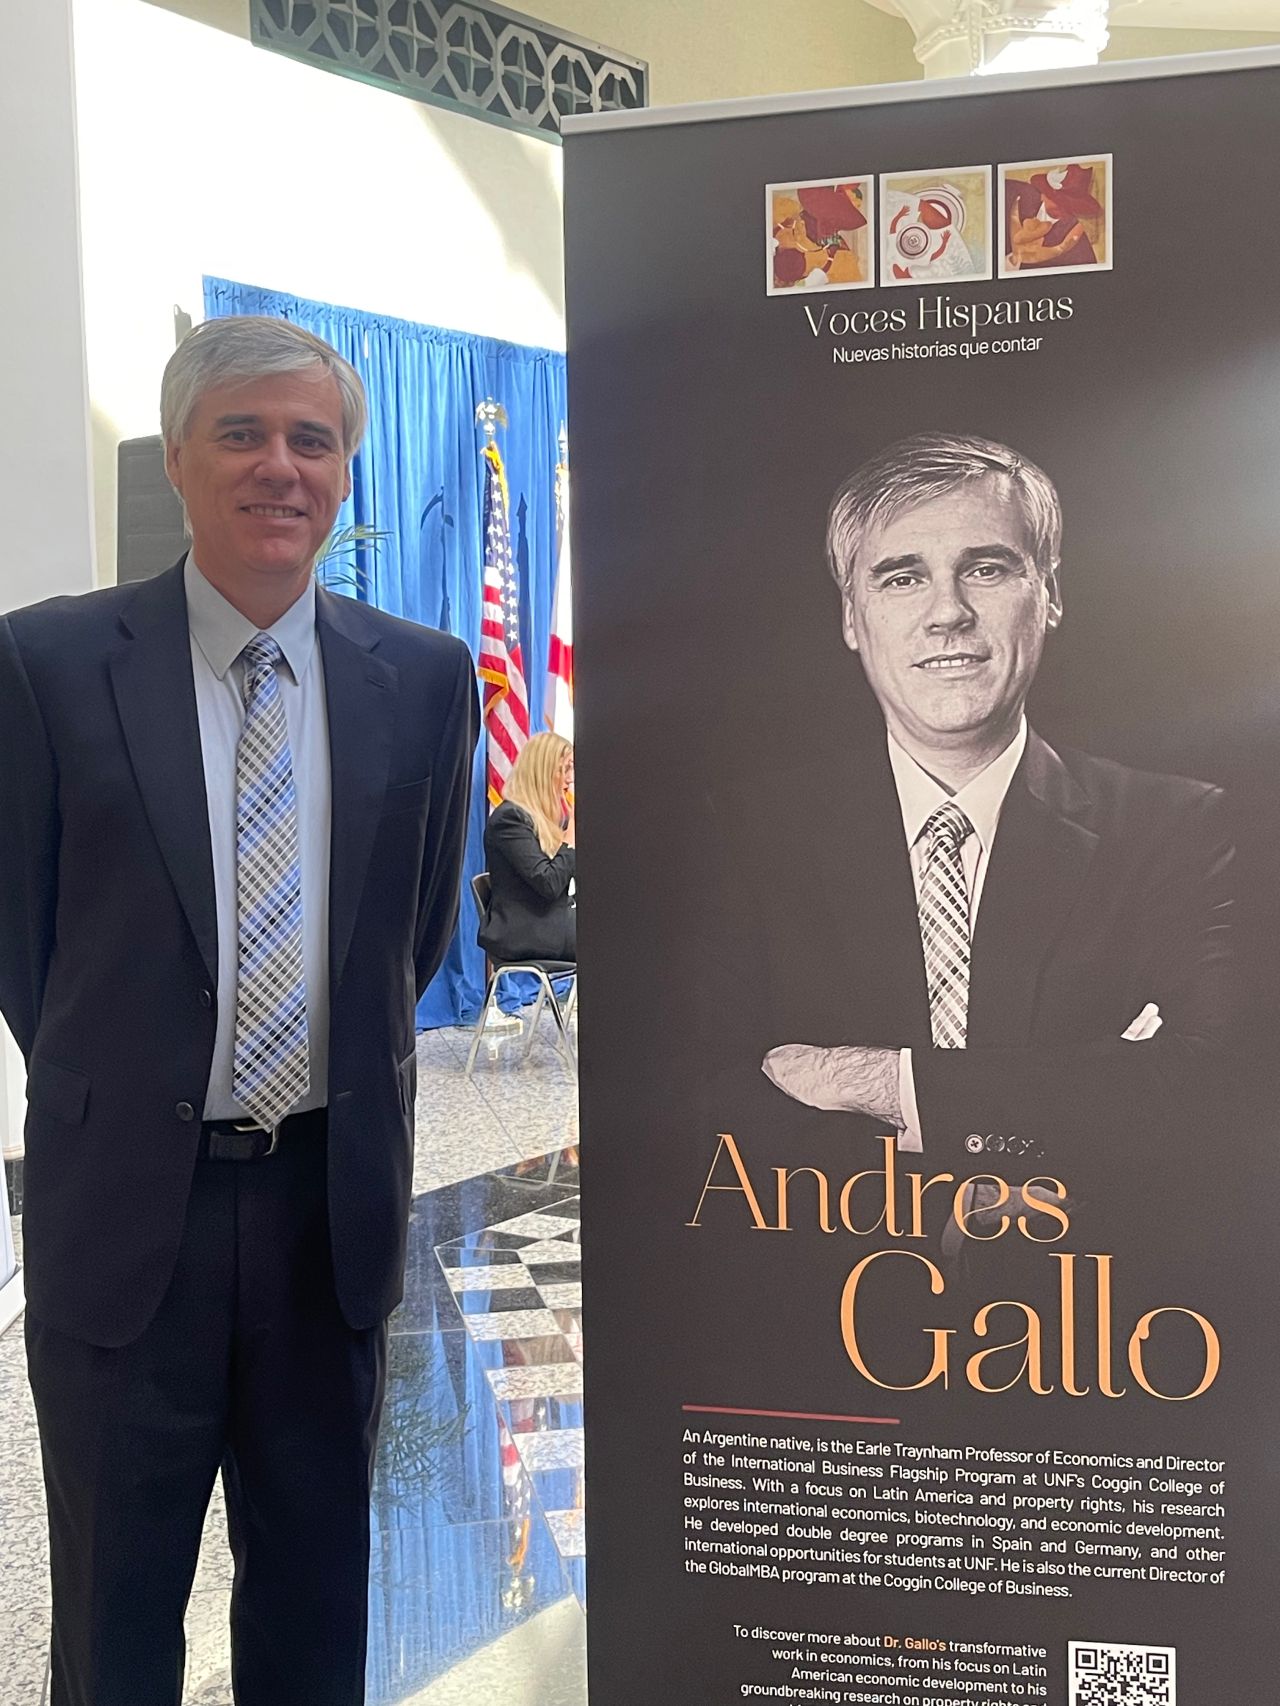 Dr. Gallo standing next to a sign with an image of Dr. Gallo and his name Andres Gallo